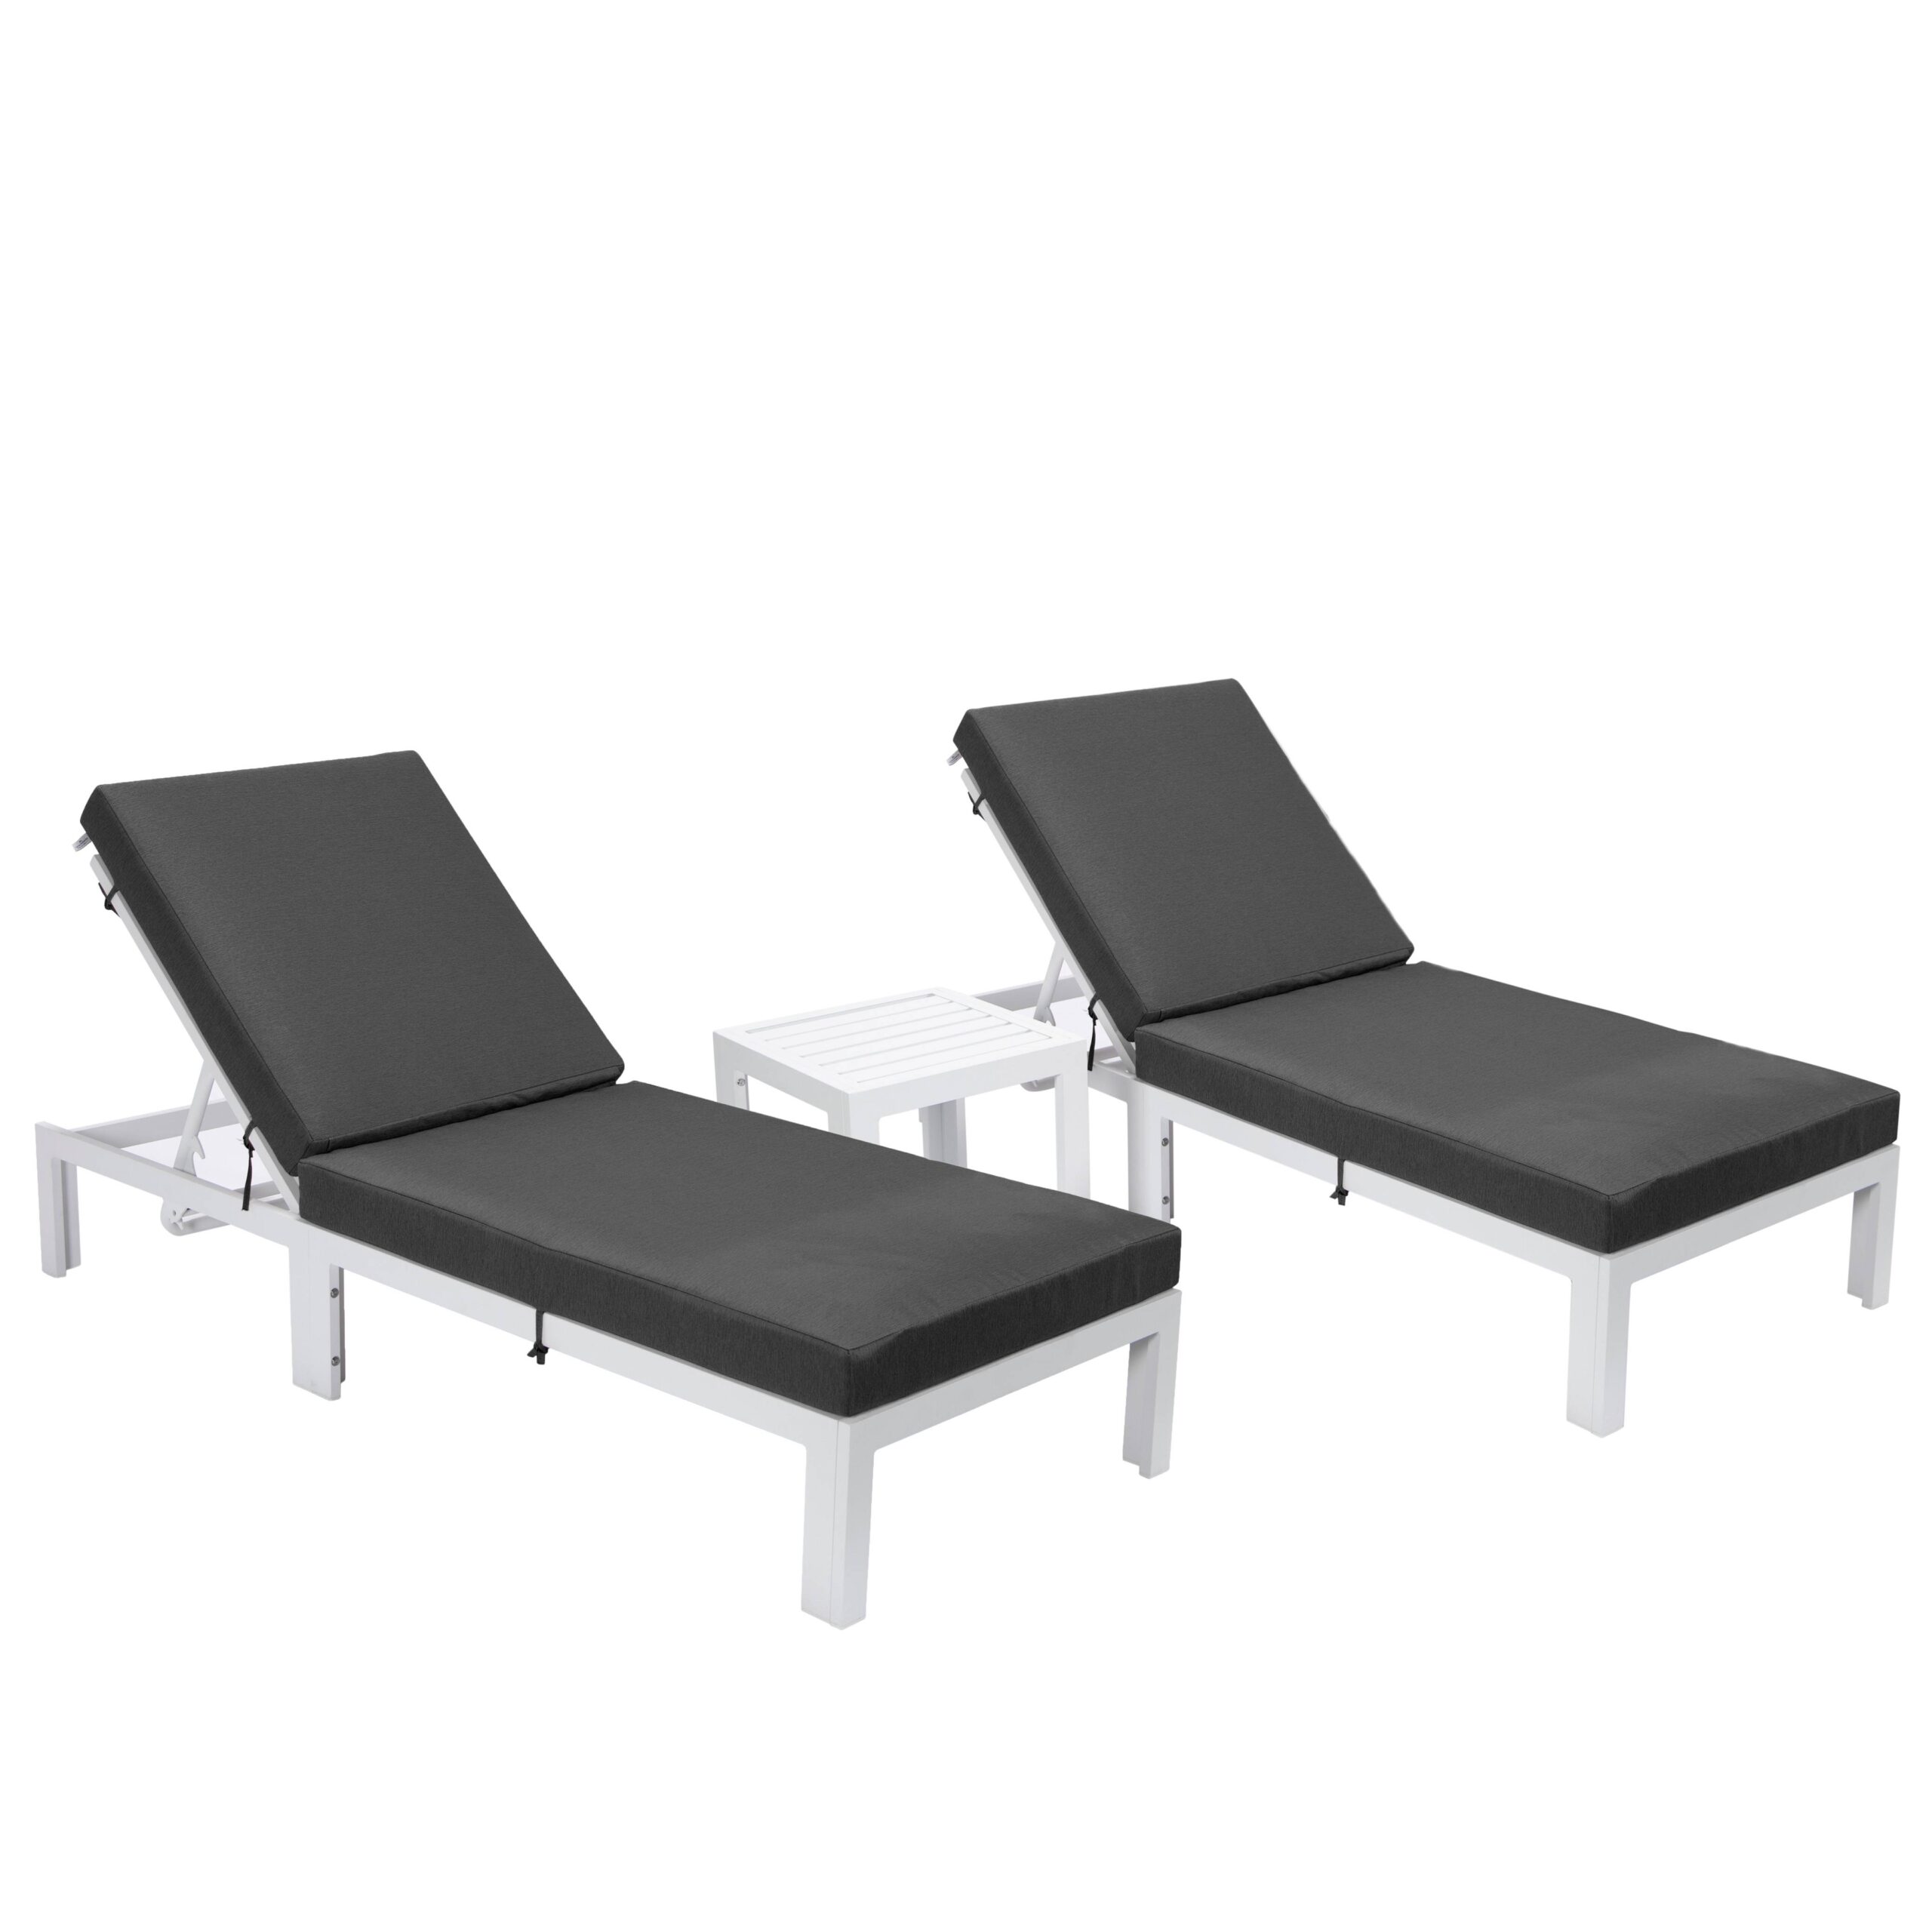 LeisureMod Chelsea Modern White Aluminum Outdoor Chaise Lounge Chair Set of 2 With Side Table & Black Cushions - image 1 of 12